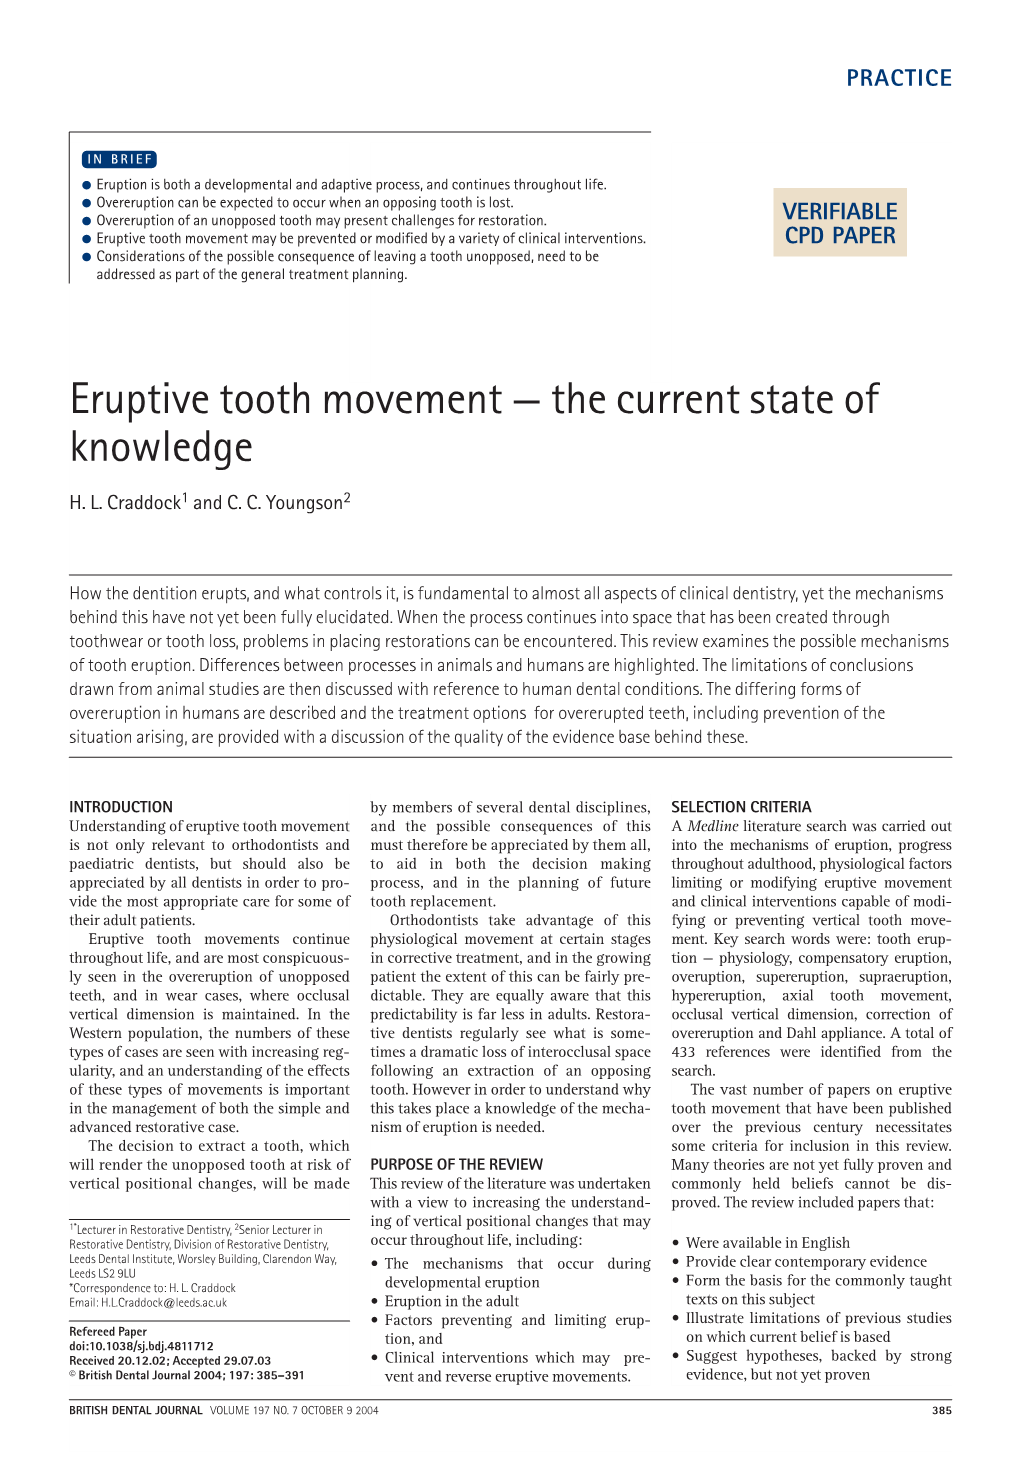 Eruptive Tooth Movement May Be Prevented Or Modified by a Variety of Clinical Interventions